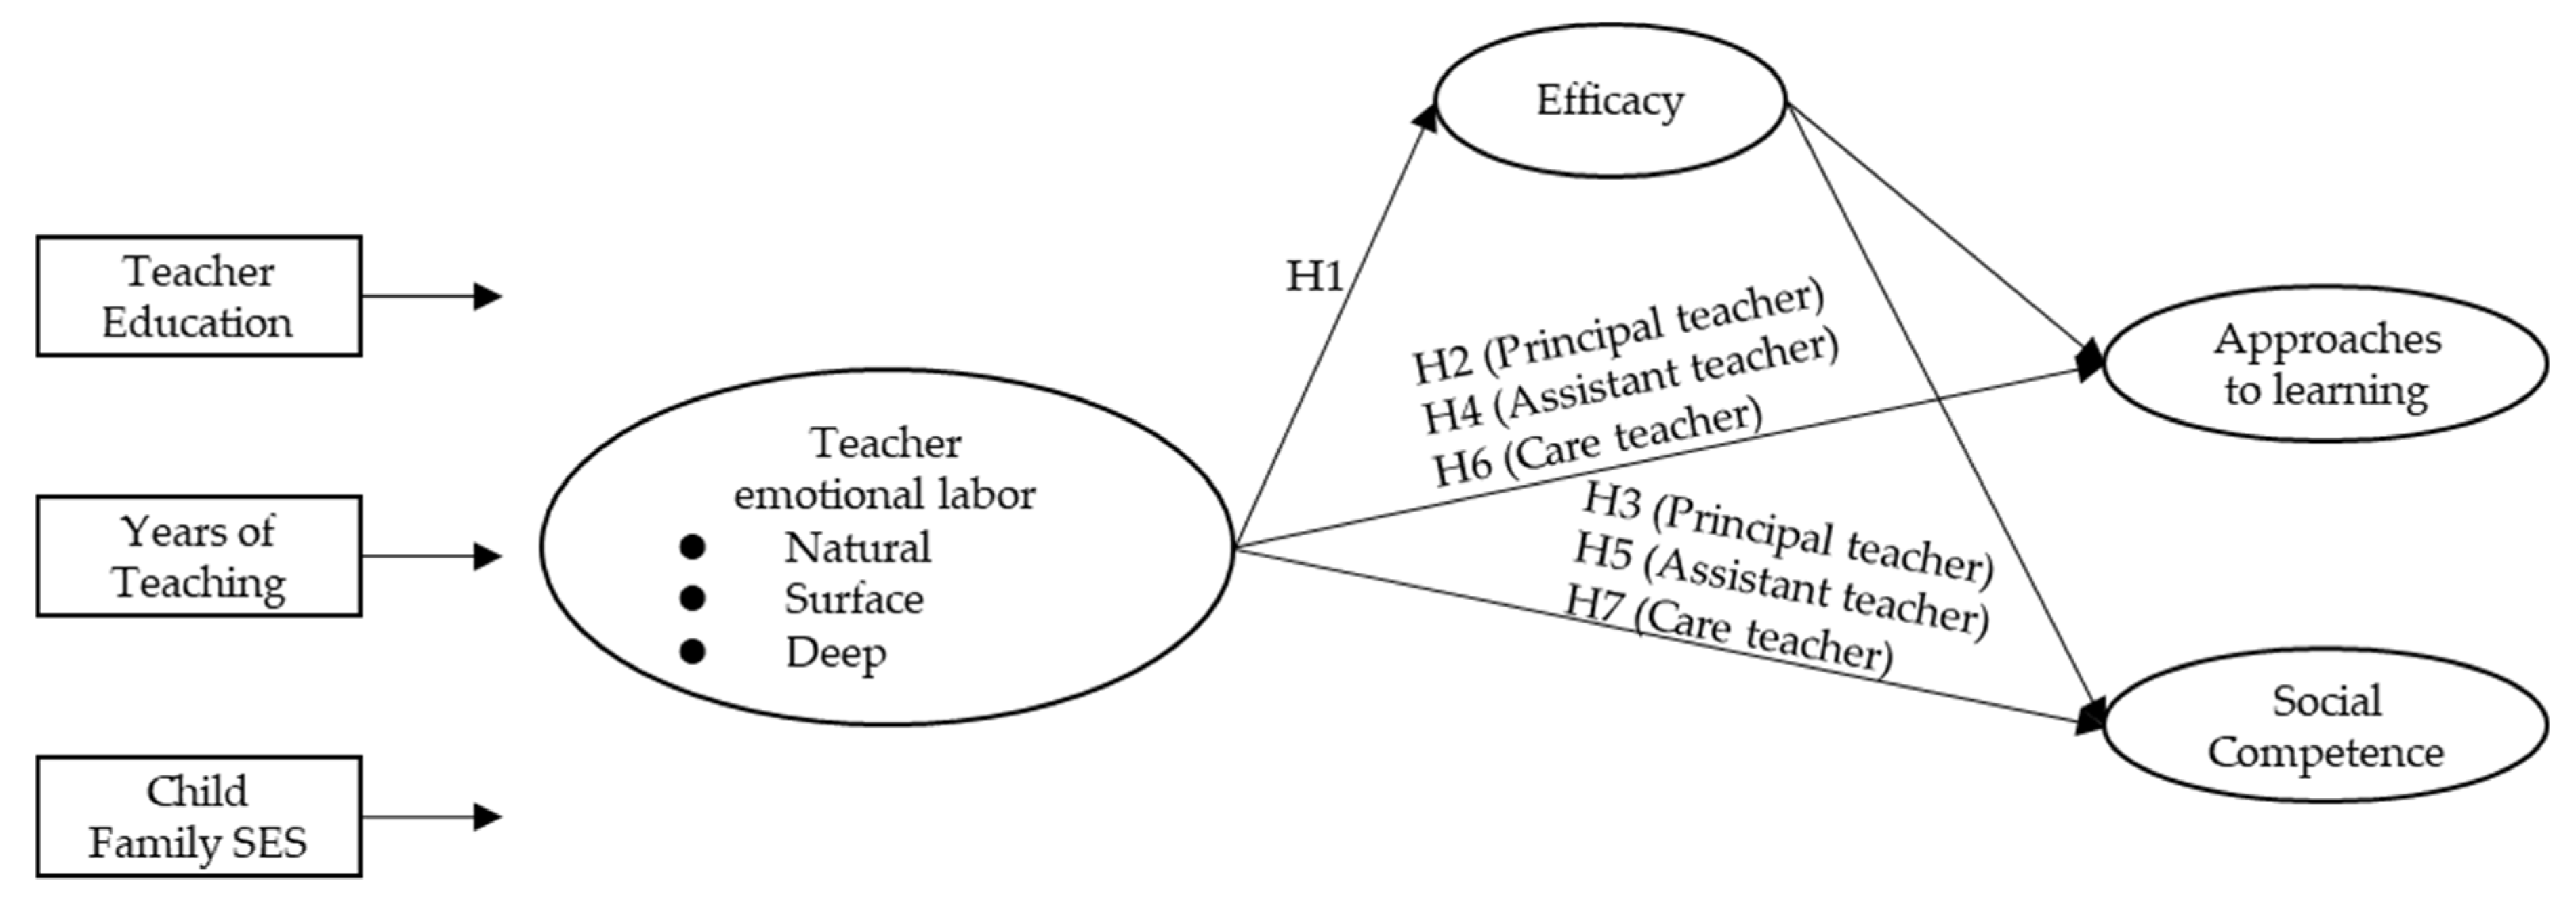 Comparing the reliability and predictive power of child, teacher